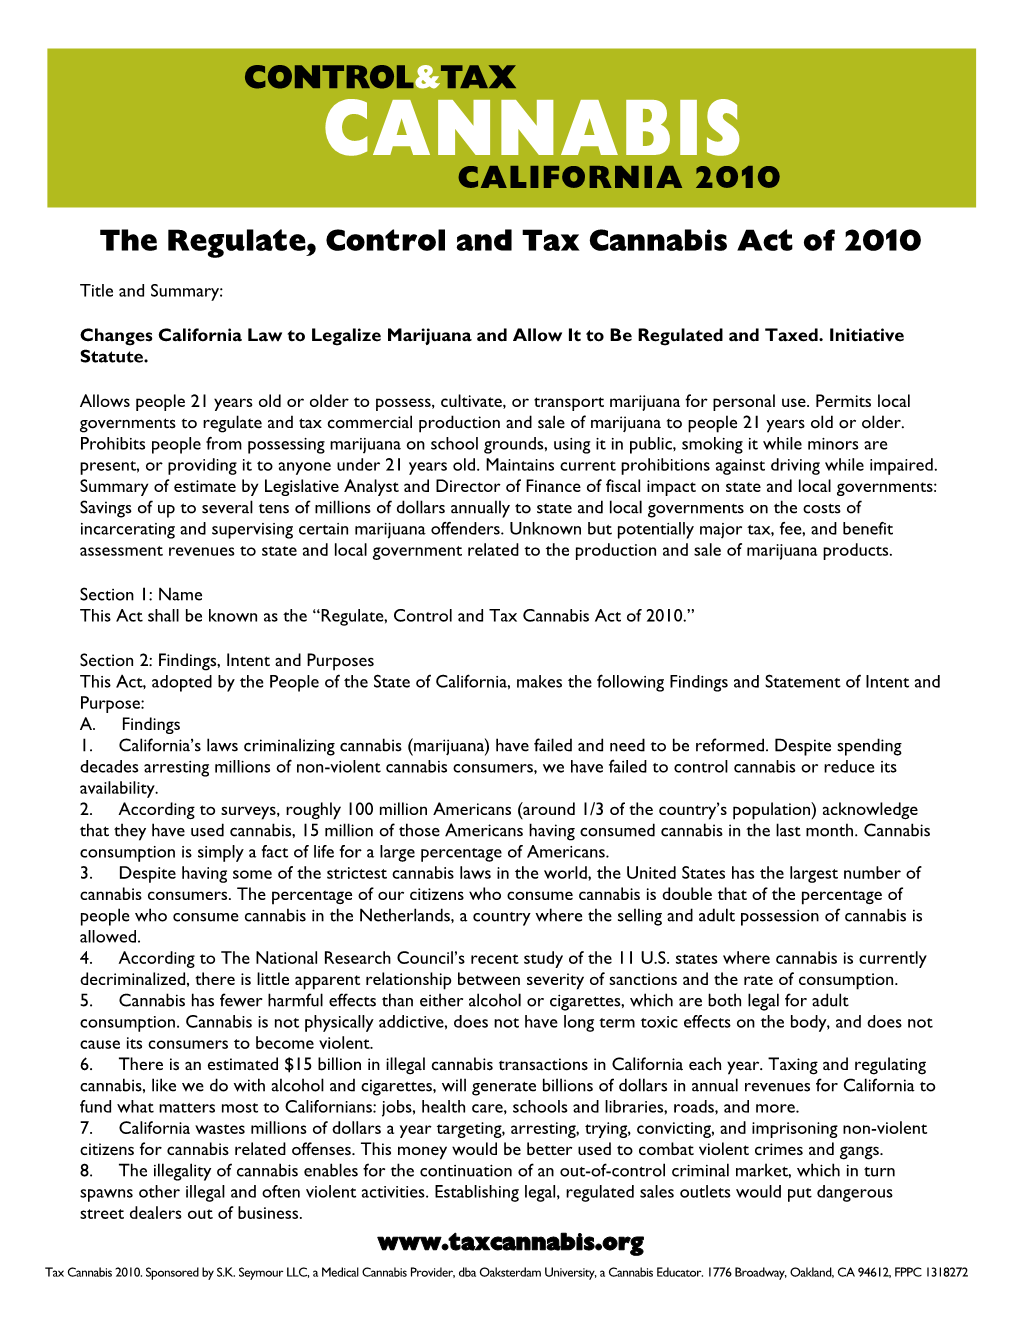 CONTROL&TAX the Regulate, Control and Tax Cannabis Act of 2010